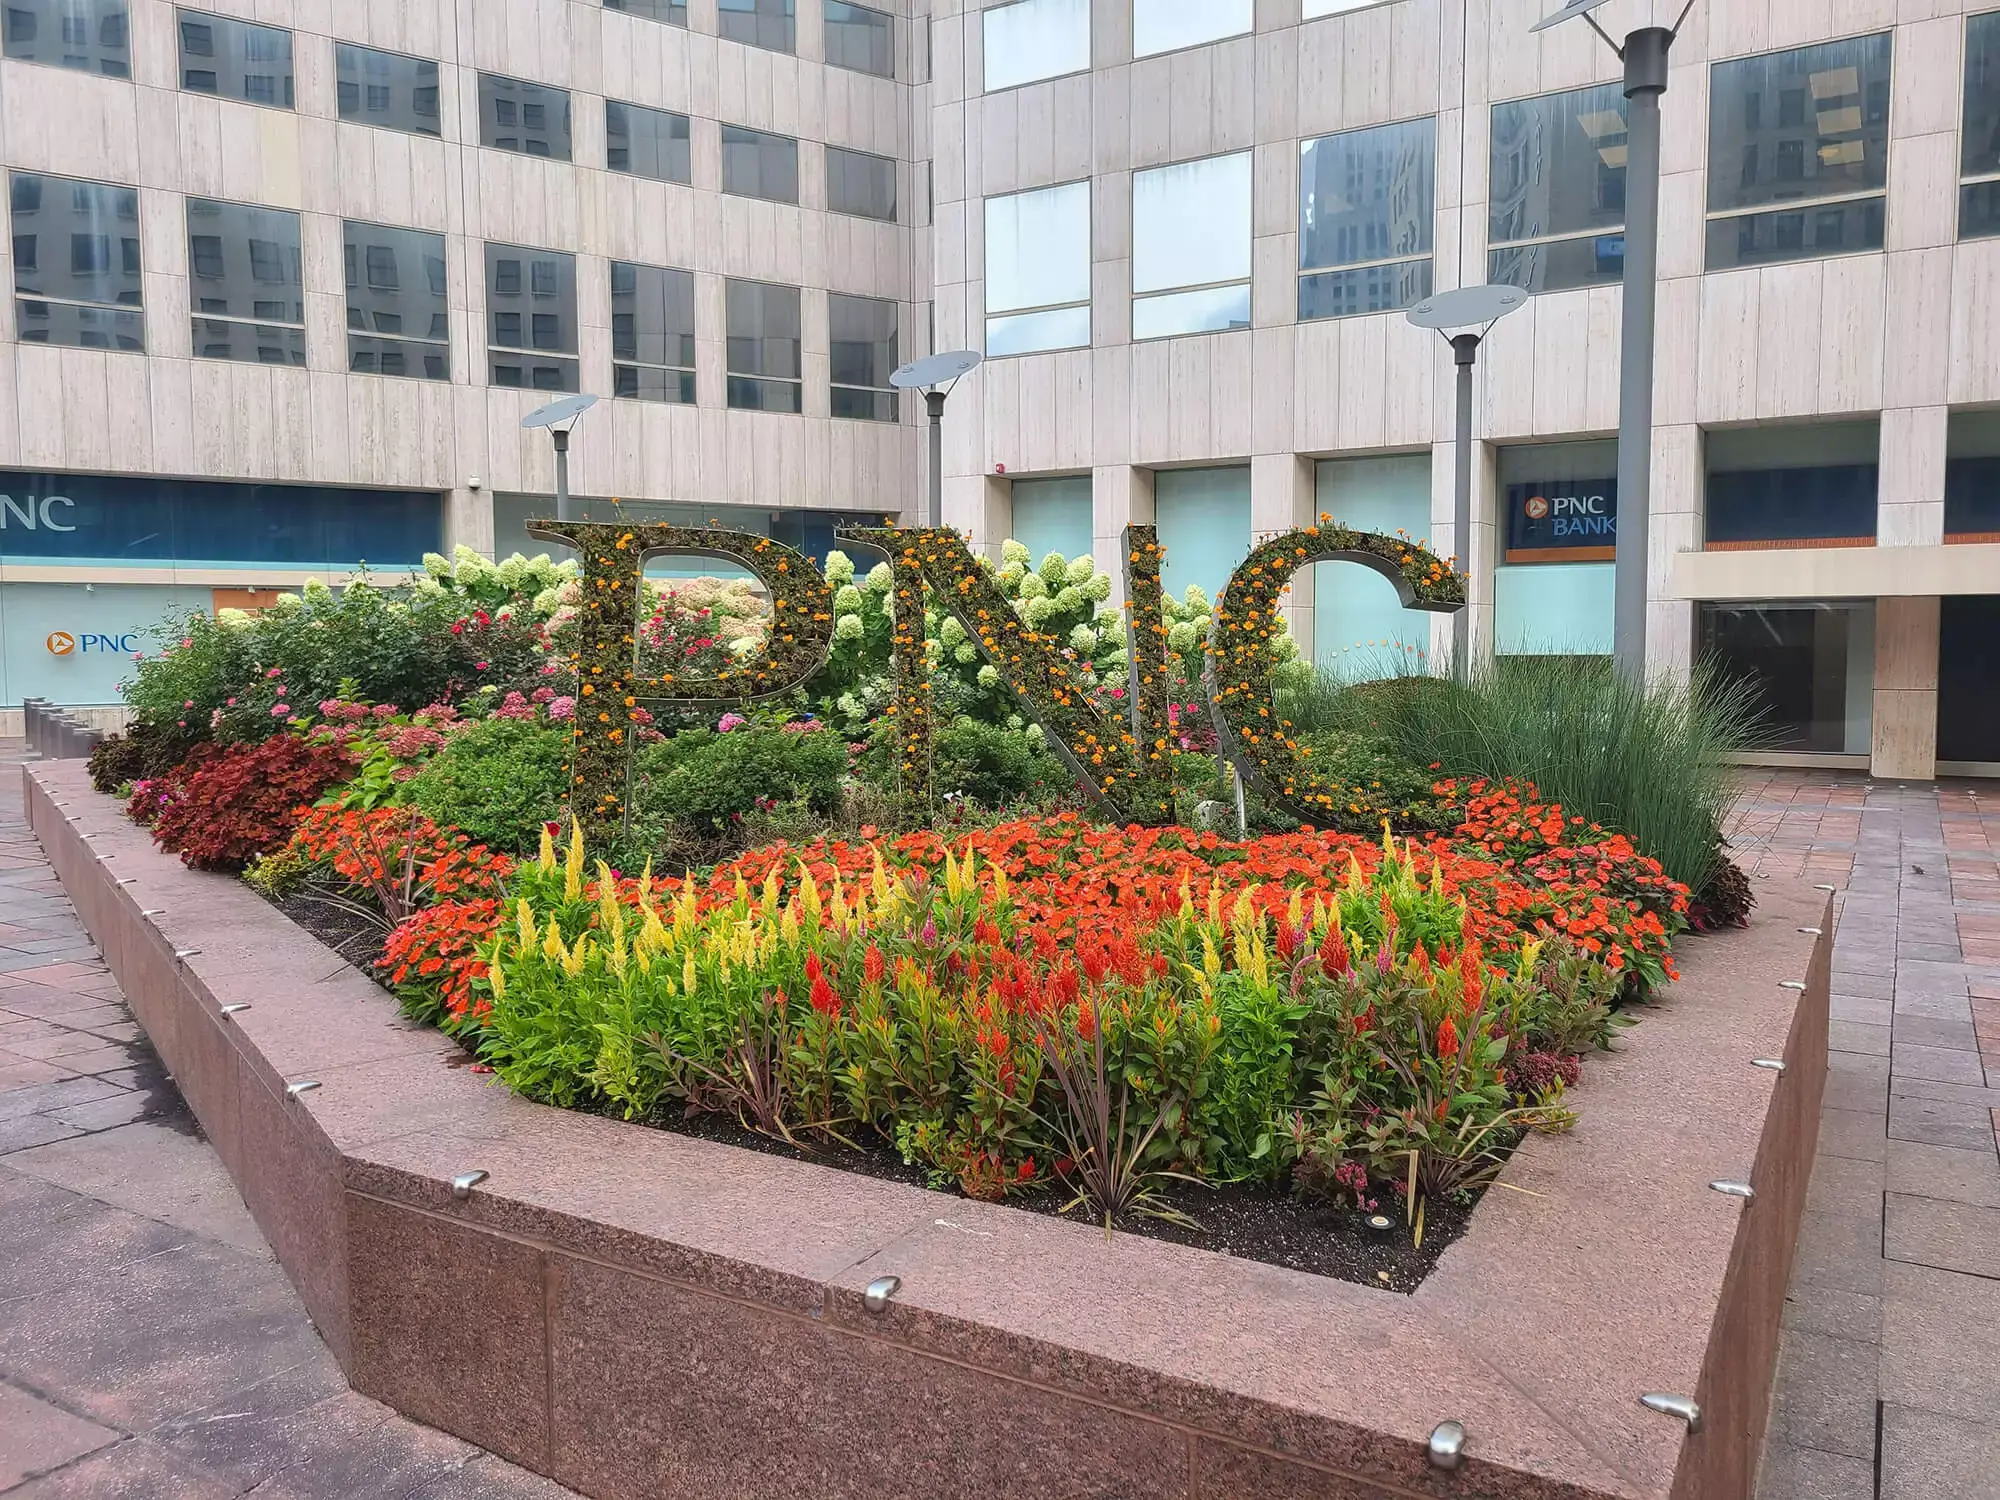 Flowerbed Feature Outside of PNC Building